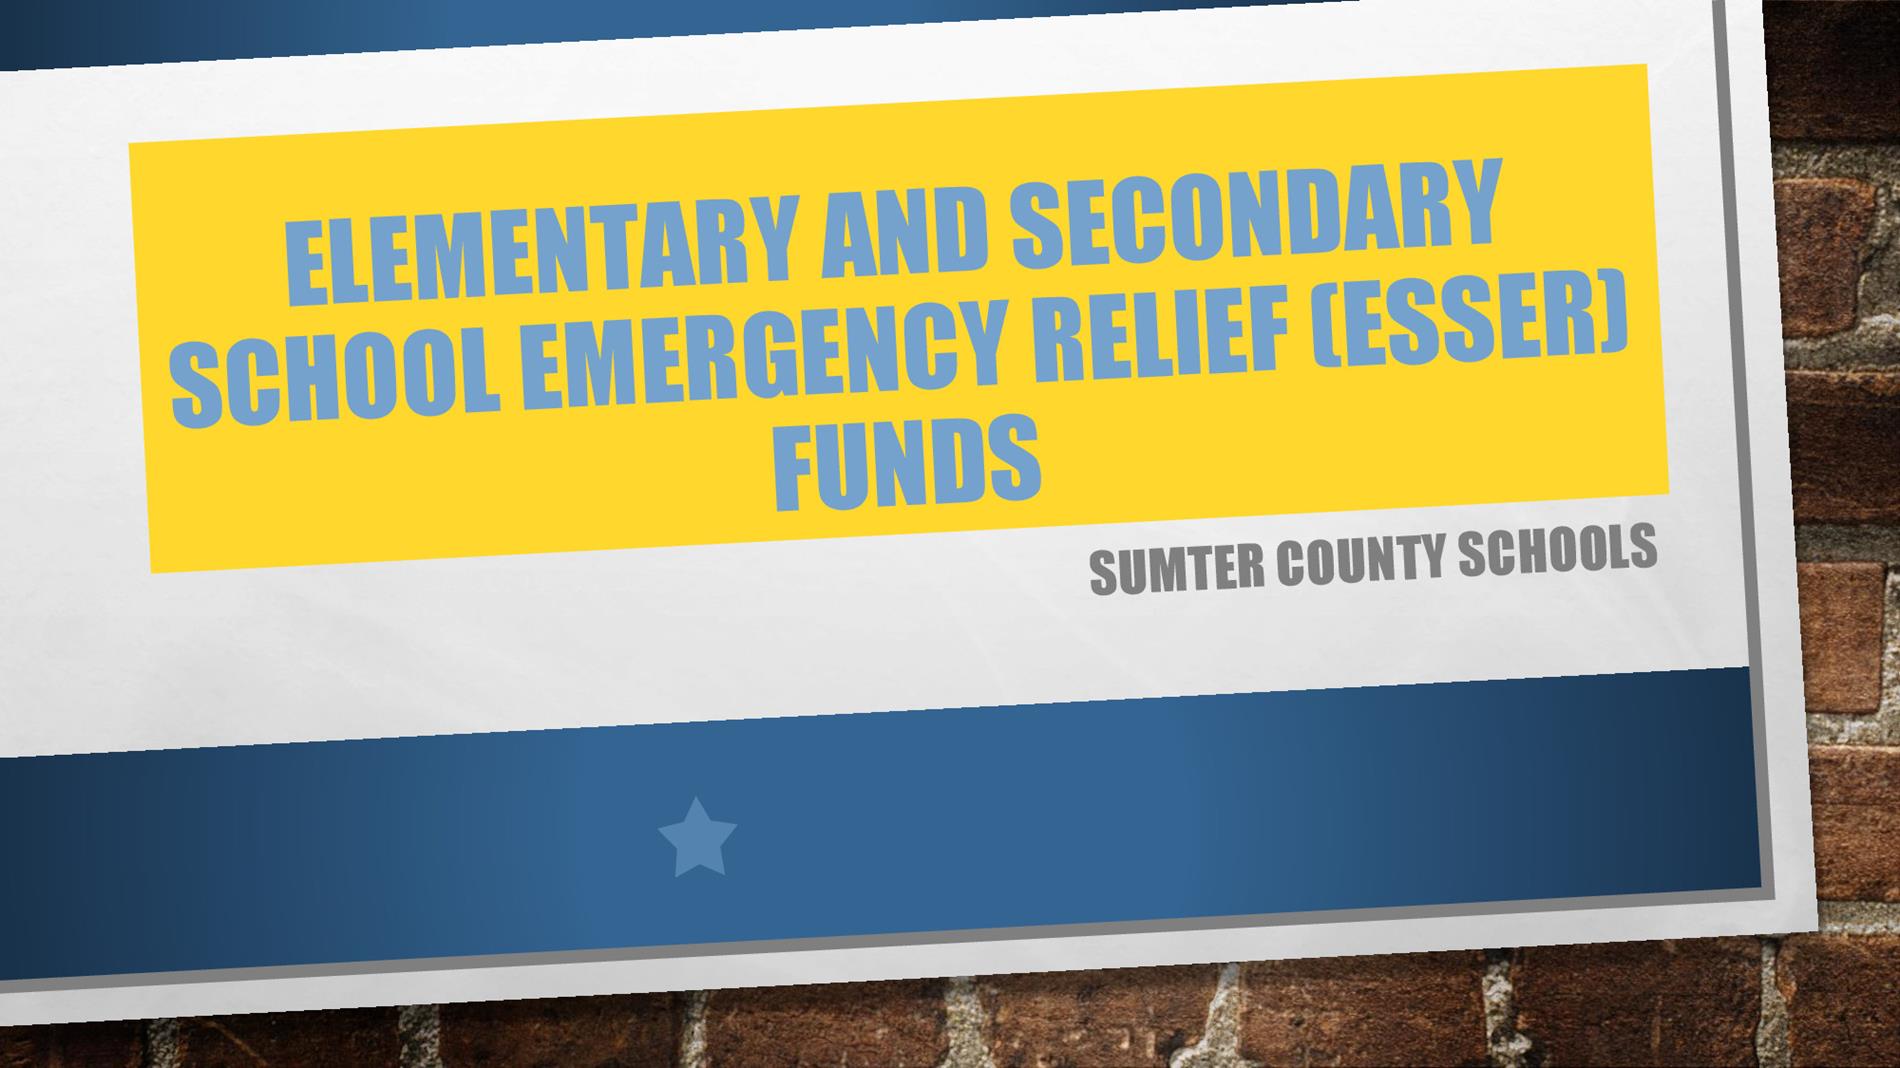 ELEMENTARY AND SECONDARY SCHOOL EMERGENCY RELIEF (ESSER) FUNDS